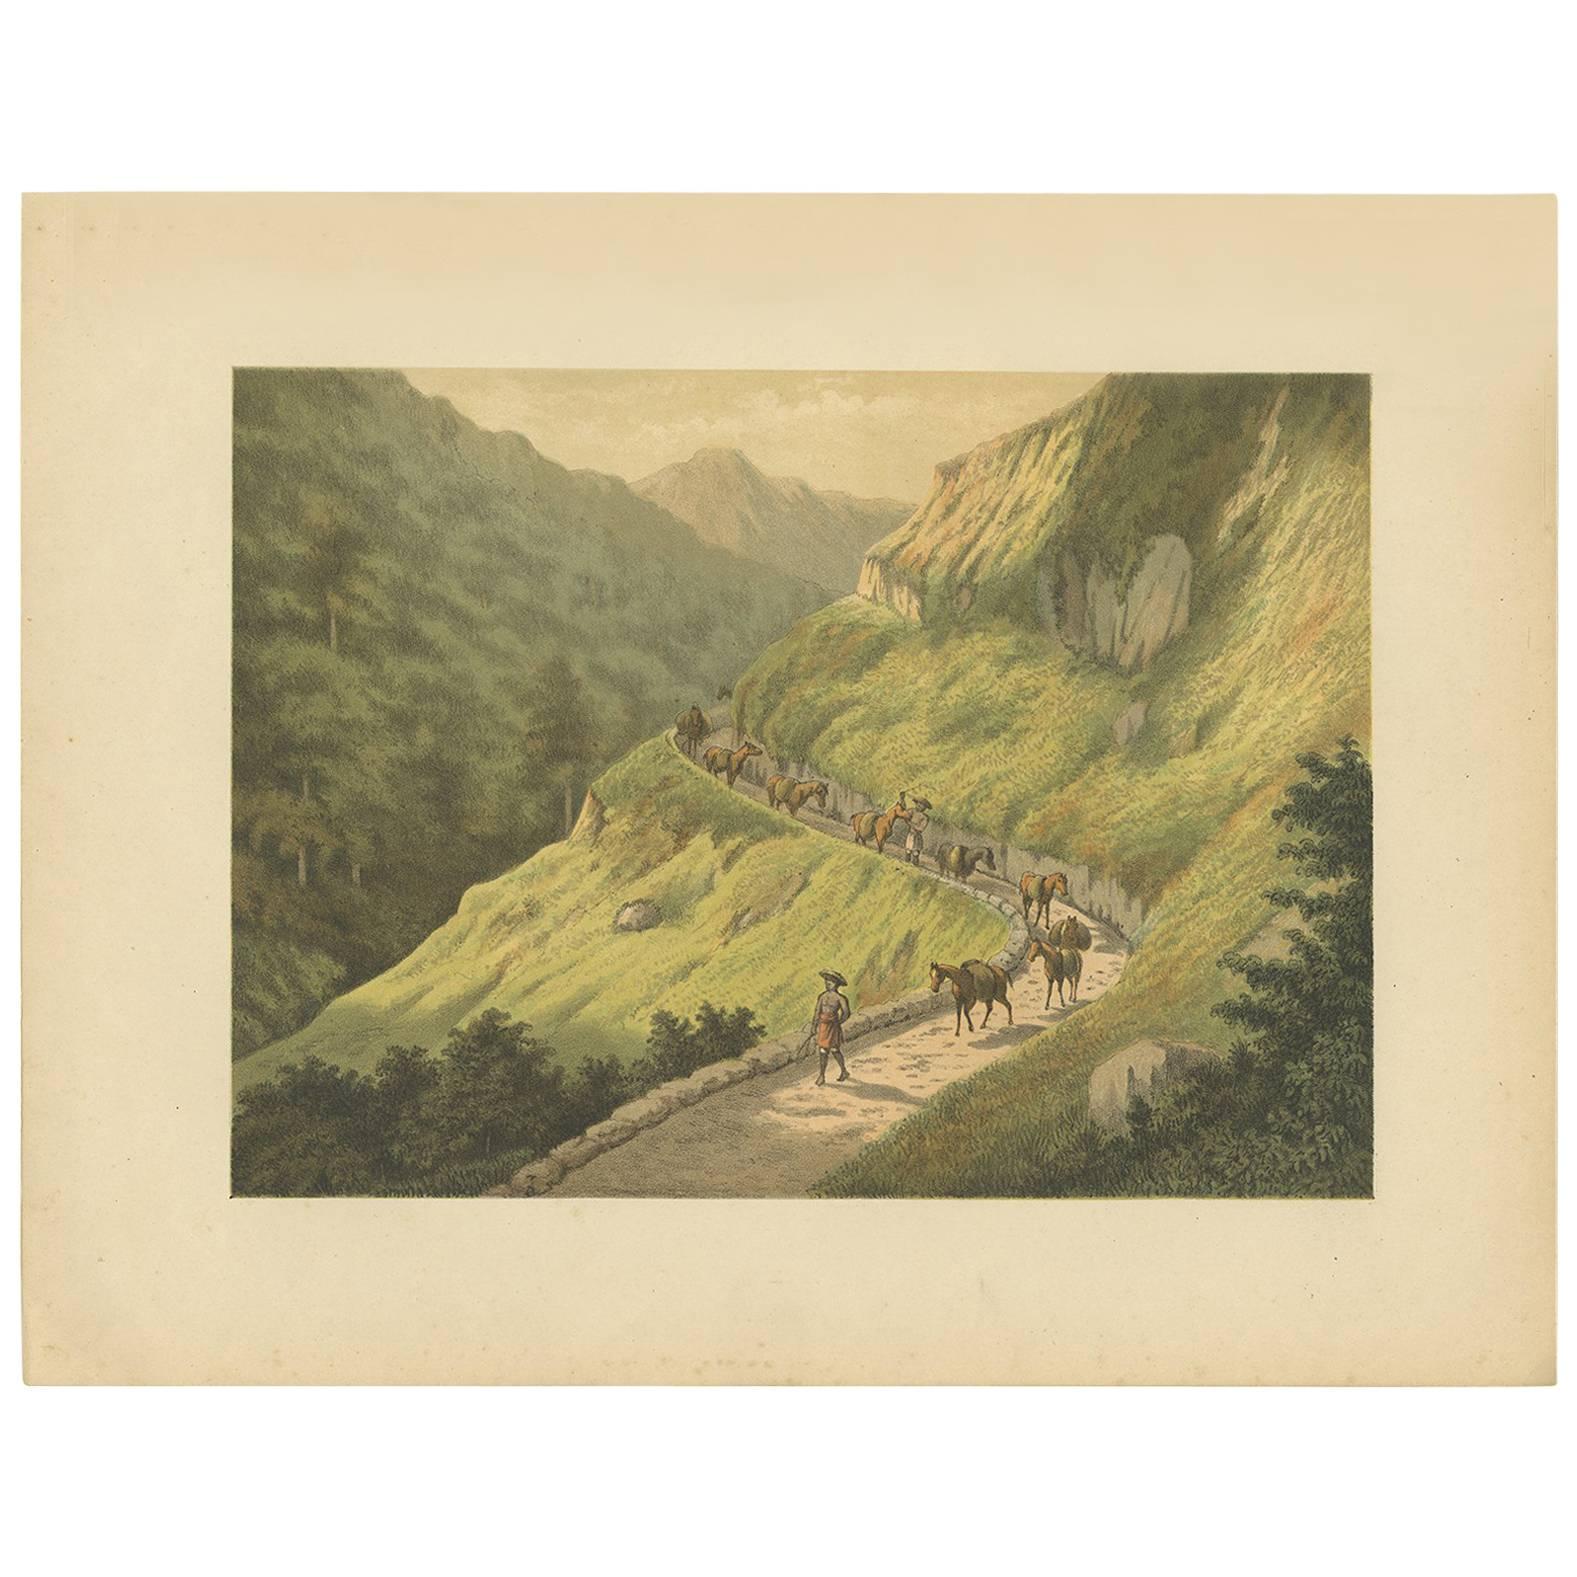 Antique Print of the Southern Mountains on Java by M.T.H. Perelaer, 1888